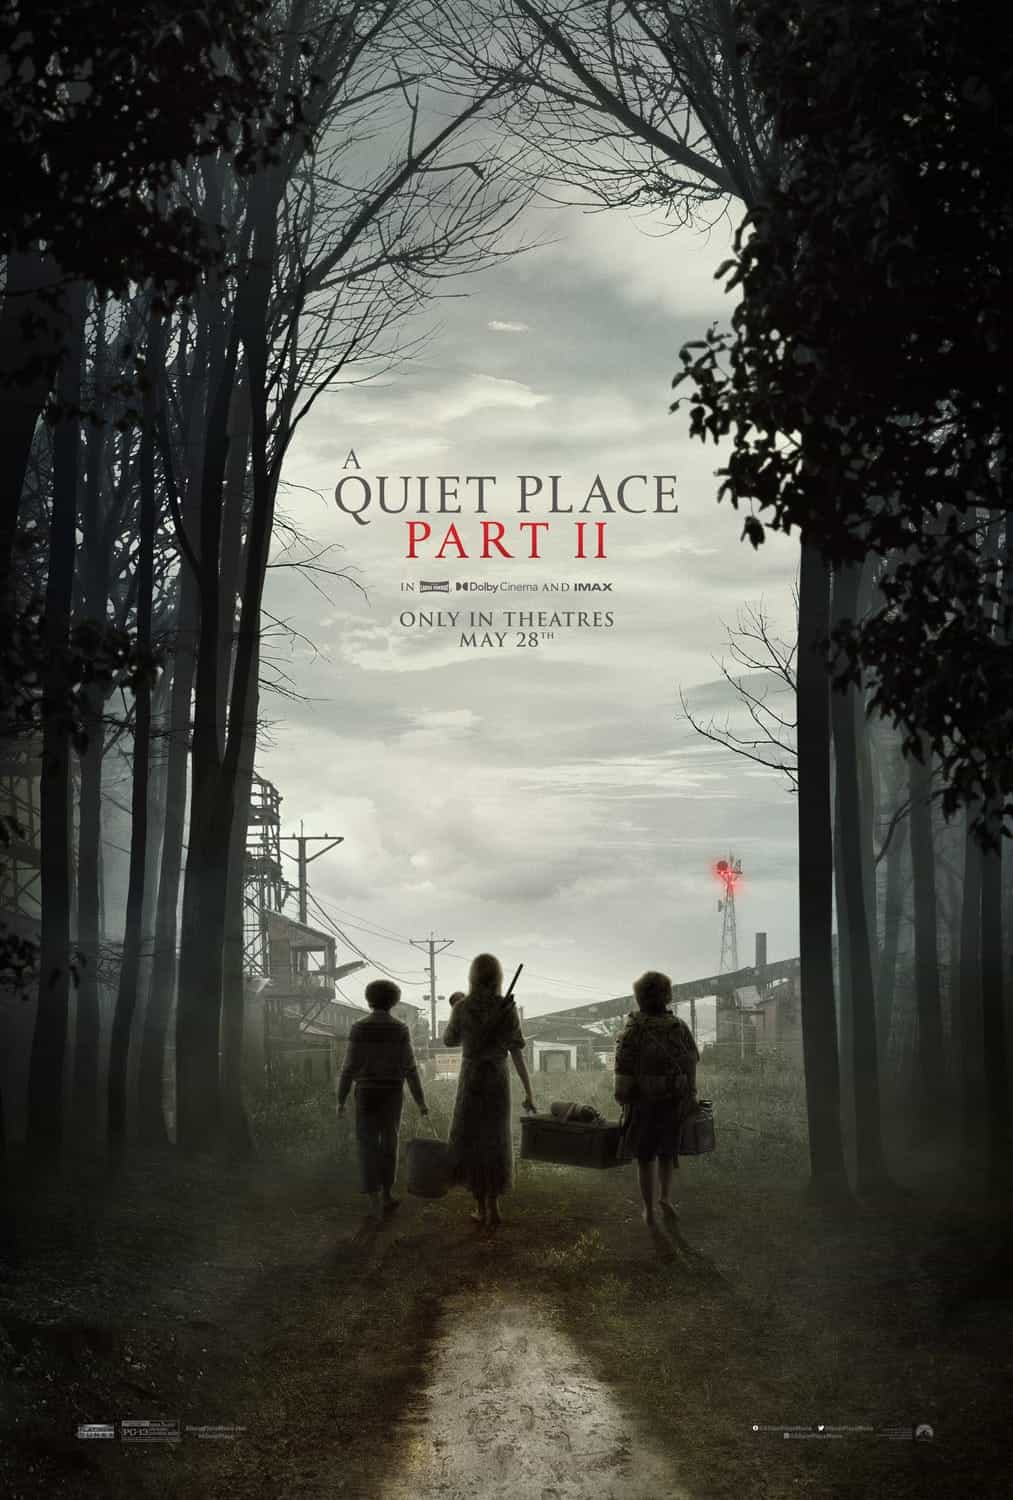 World Box Office Weekend Report 28th - 30th May 2021:  A Quiet Place 2 starts its global domination as it top the box office with $70 Million over the weekend